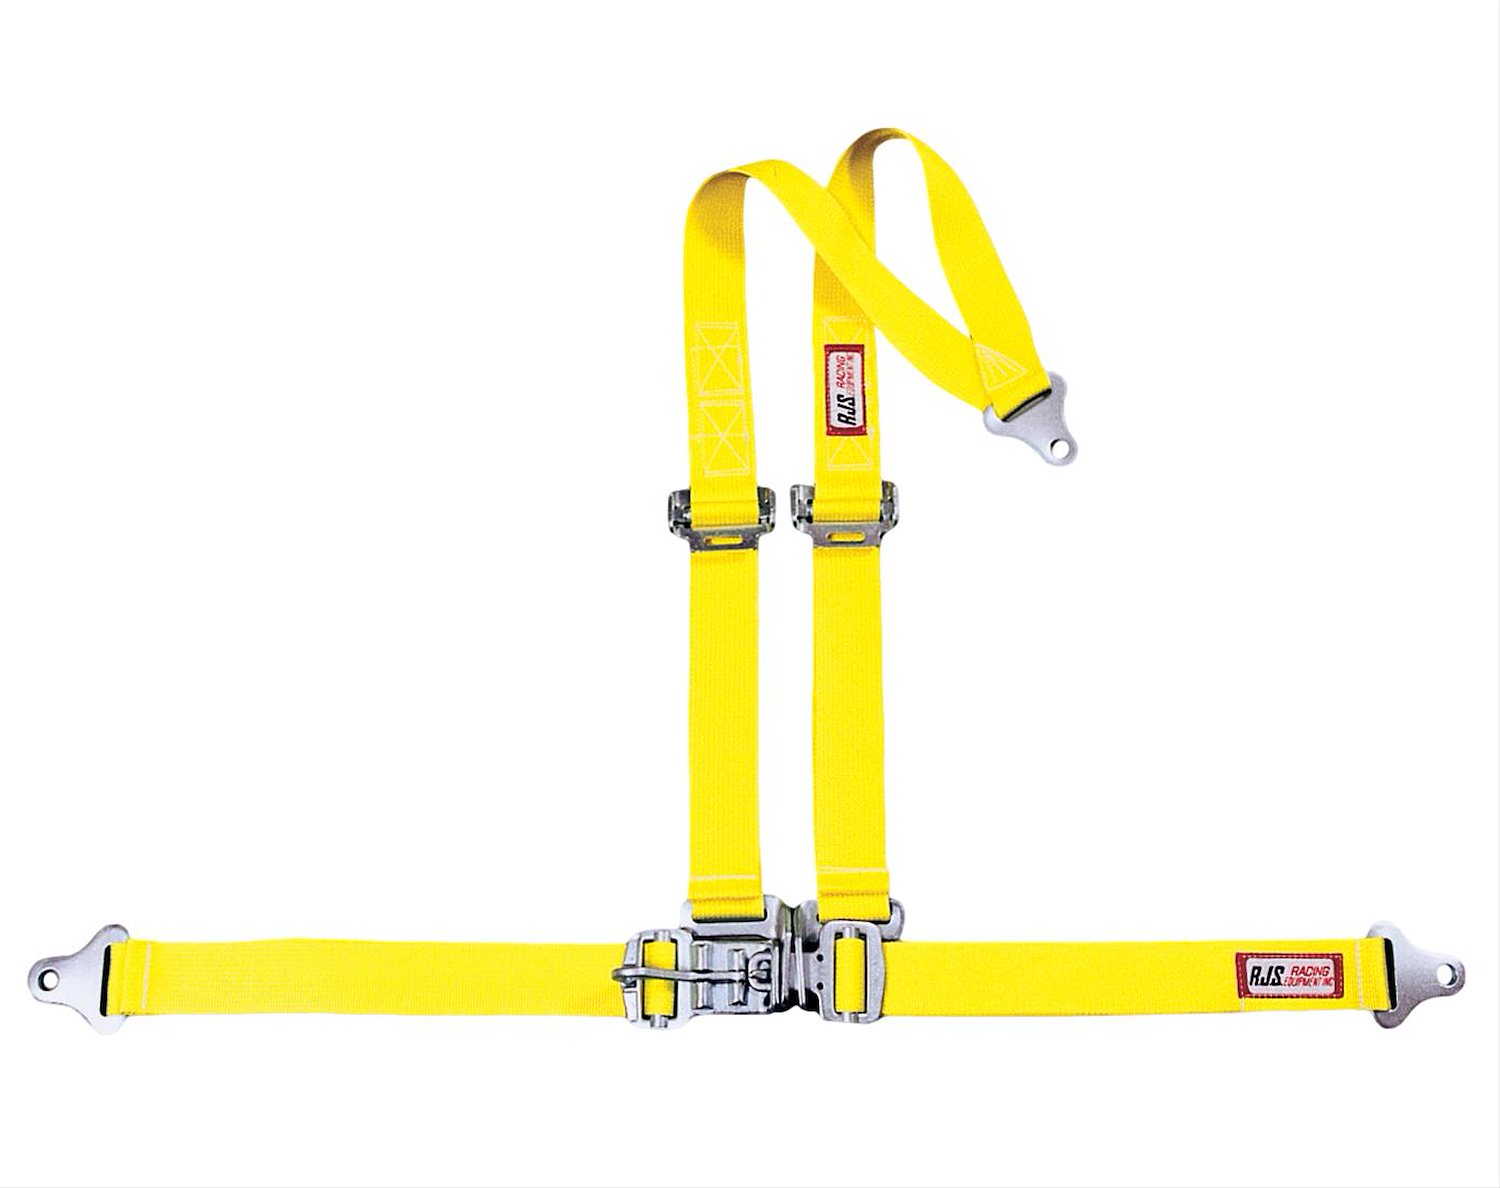 NON-SFI L&L HARNESS 2 PULL DOWN Lap Belt w/adjuster 2 S.H. V ROLL BAR Mount ALL BOLT ENDS YELLOW